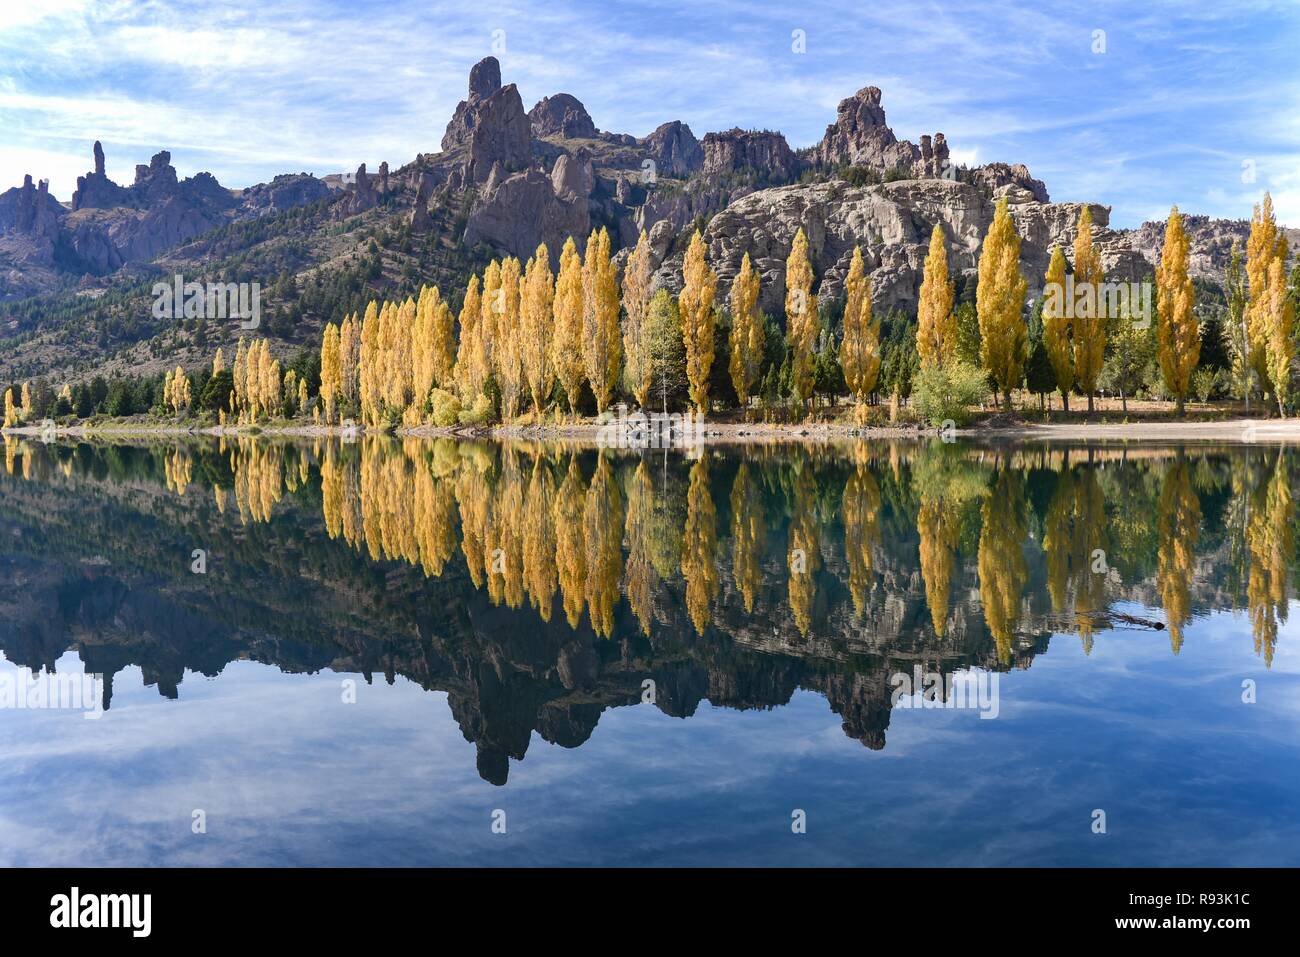 River Limay with poplars in autumn colour at Bariloche, Ruta 40, Patagonia, Argentina Stock Photo